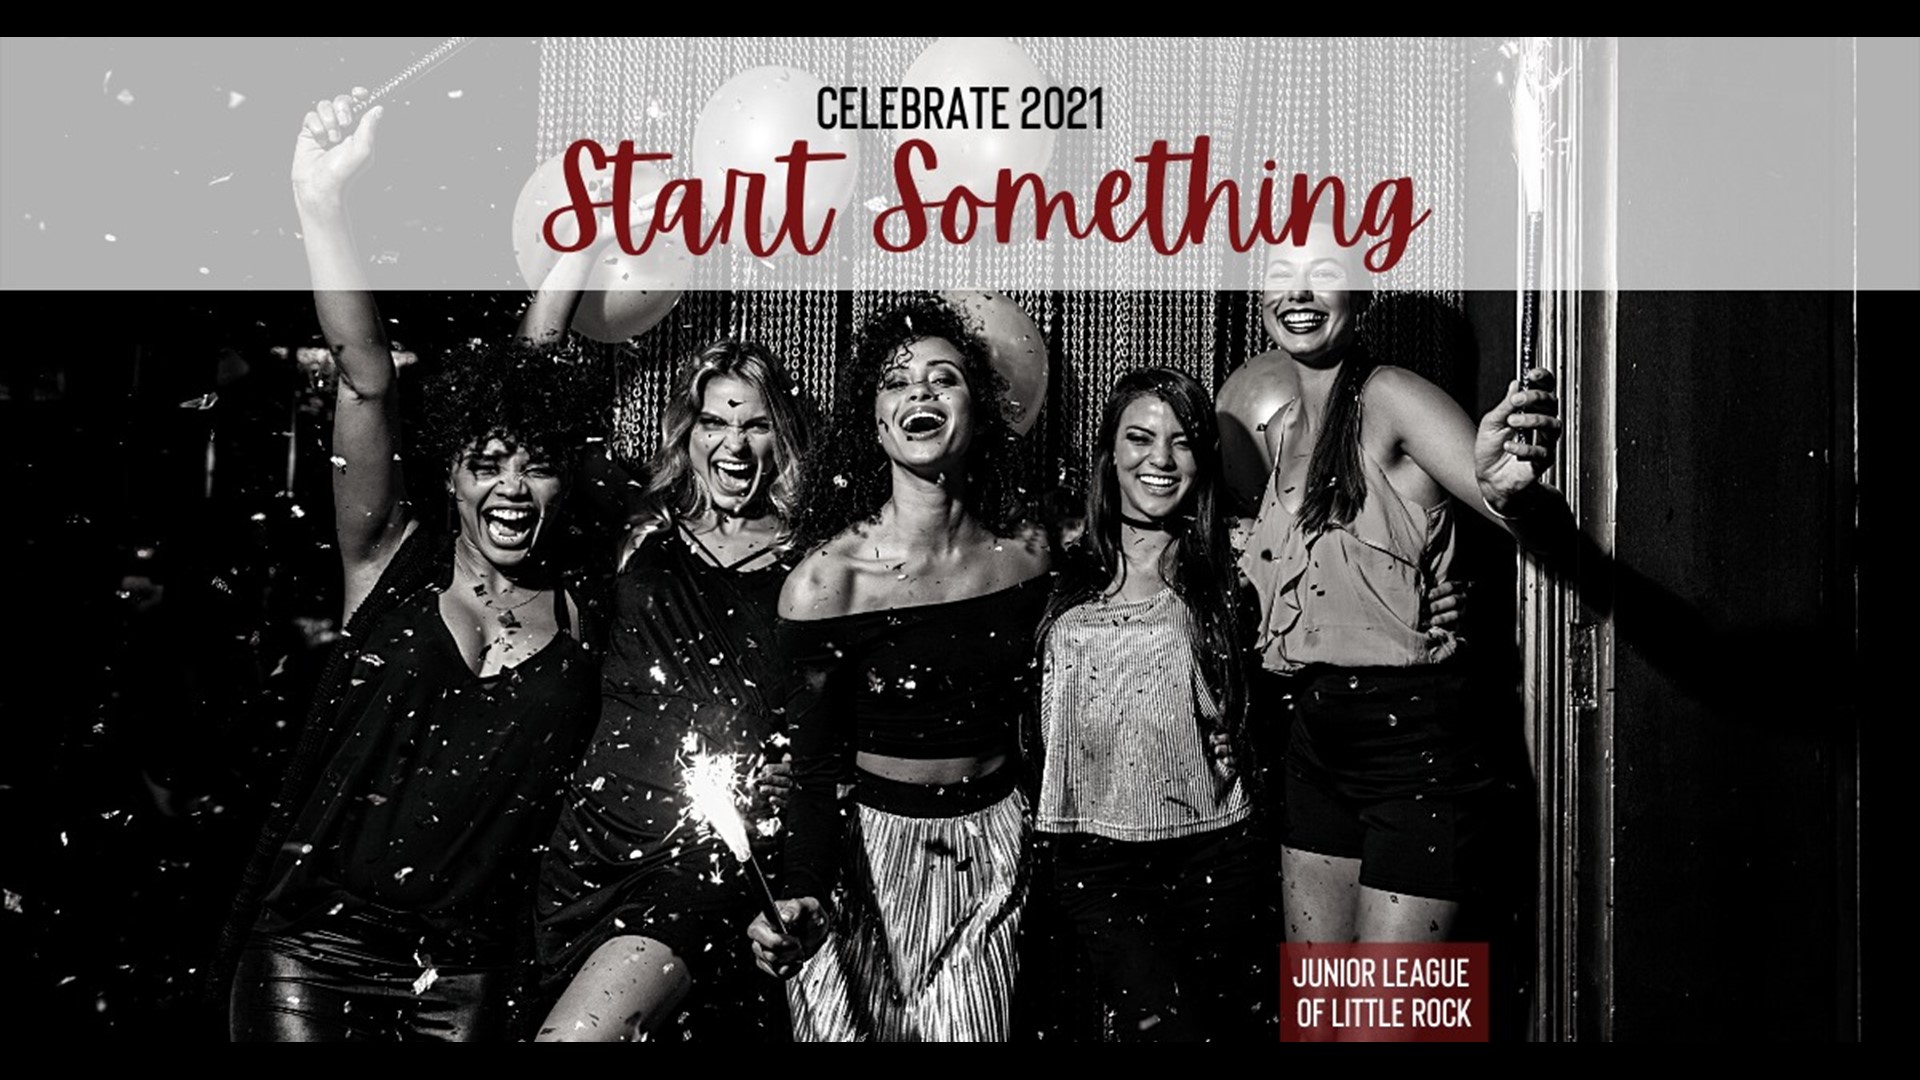 The Junior League of Little Rock is hosting its first Start Something Summit this Saturday, Jan. 23 via Zoom from 7:30 a.m. to noon.